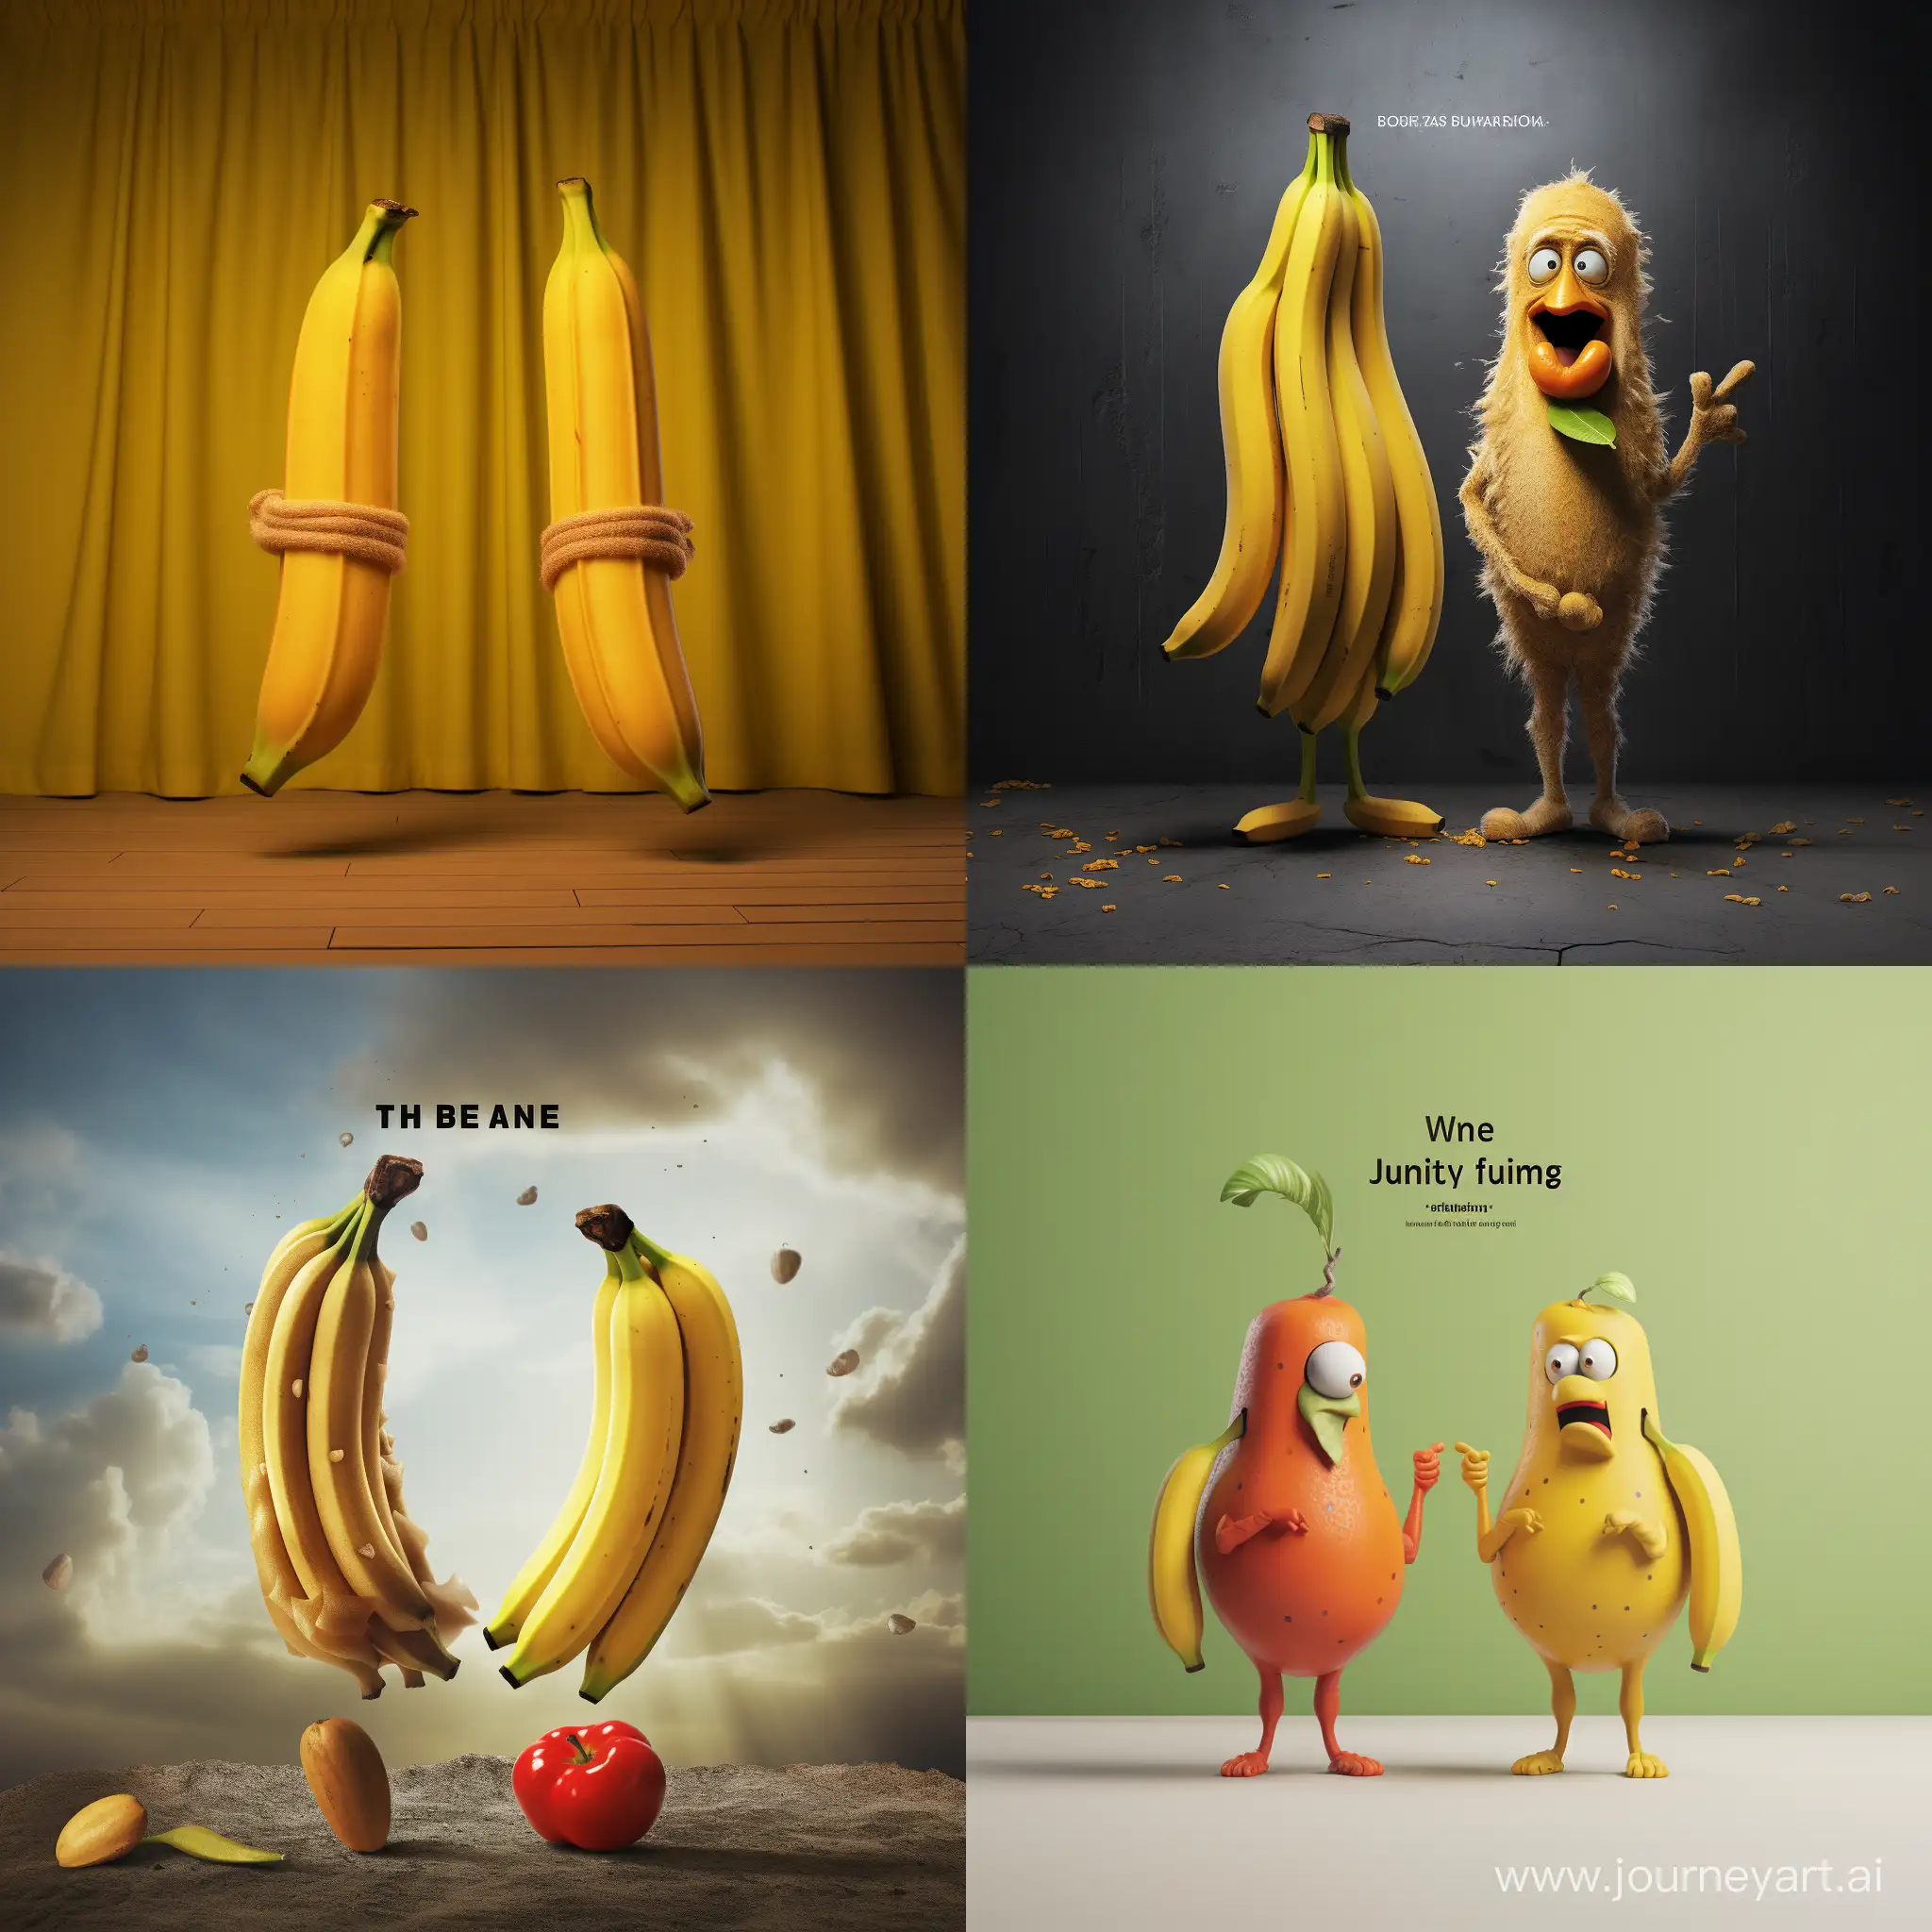 Philosophical-Banana-Debate-on-Lifes-Meaning